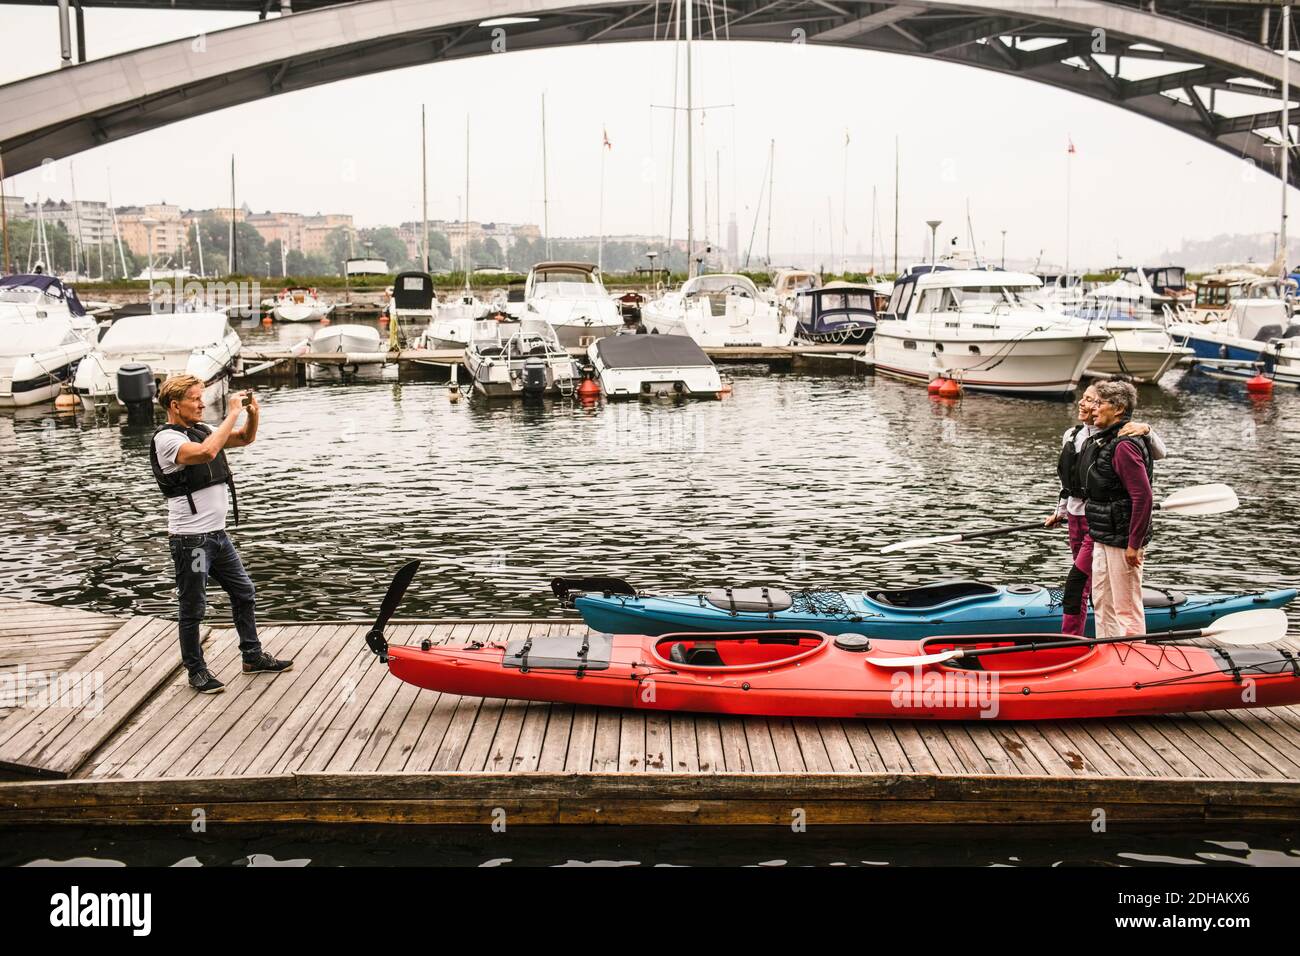 Senior male photographing female friends on jetty during kayaking course Stock Photo